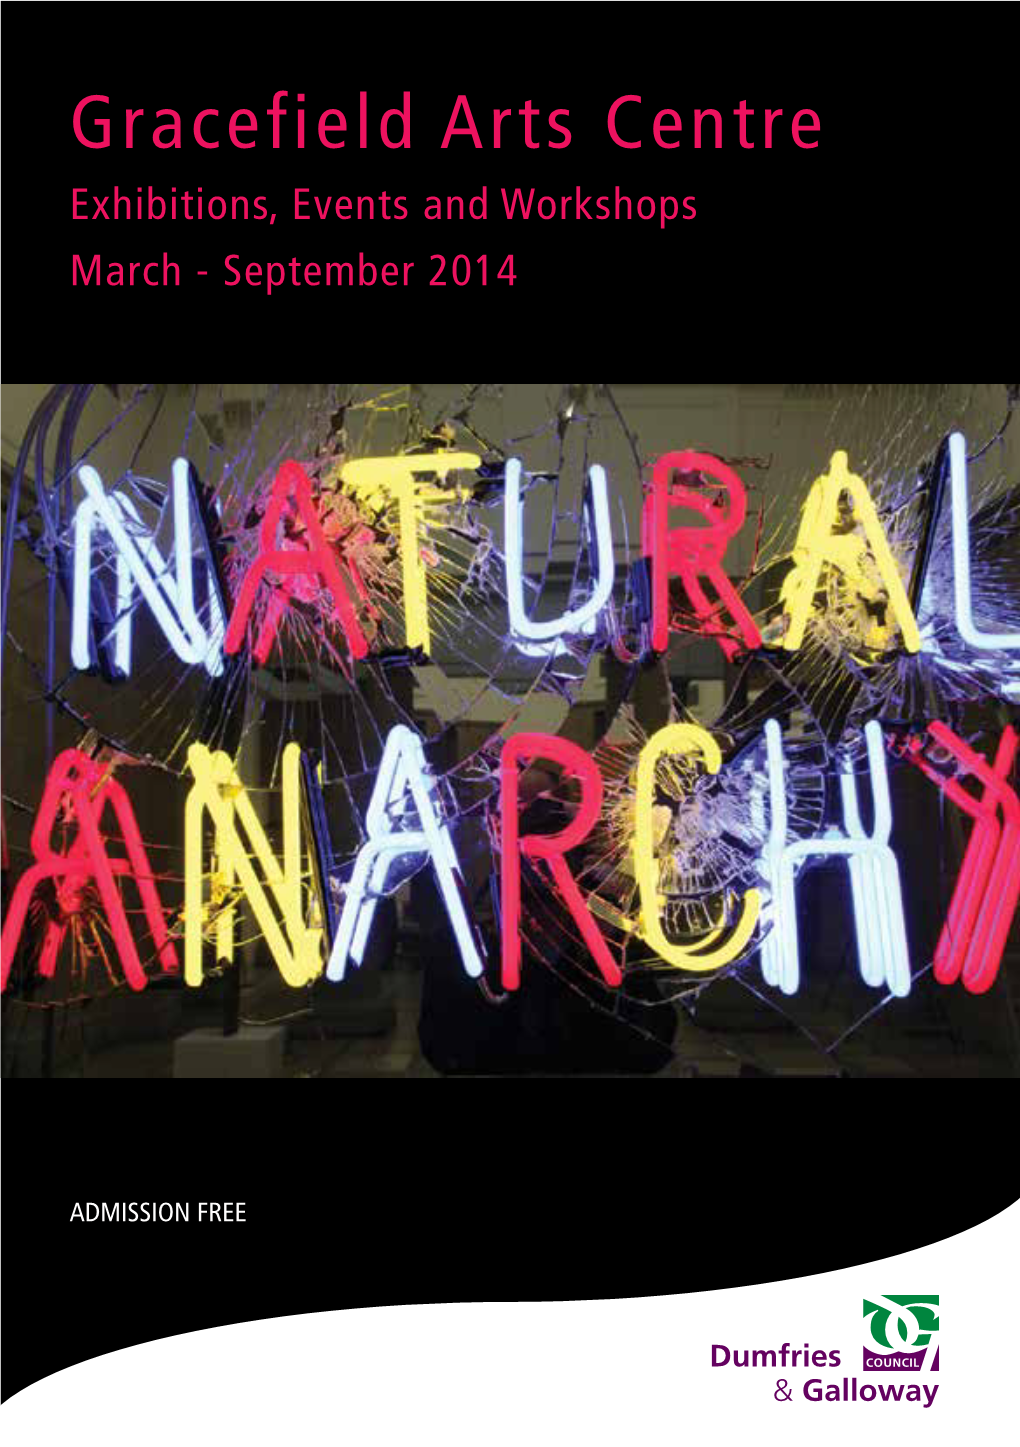 Exhibitions, Events and Workshops March - September 2014